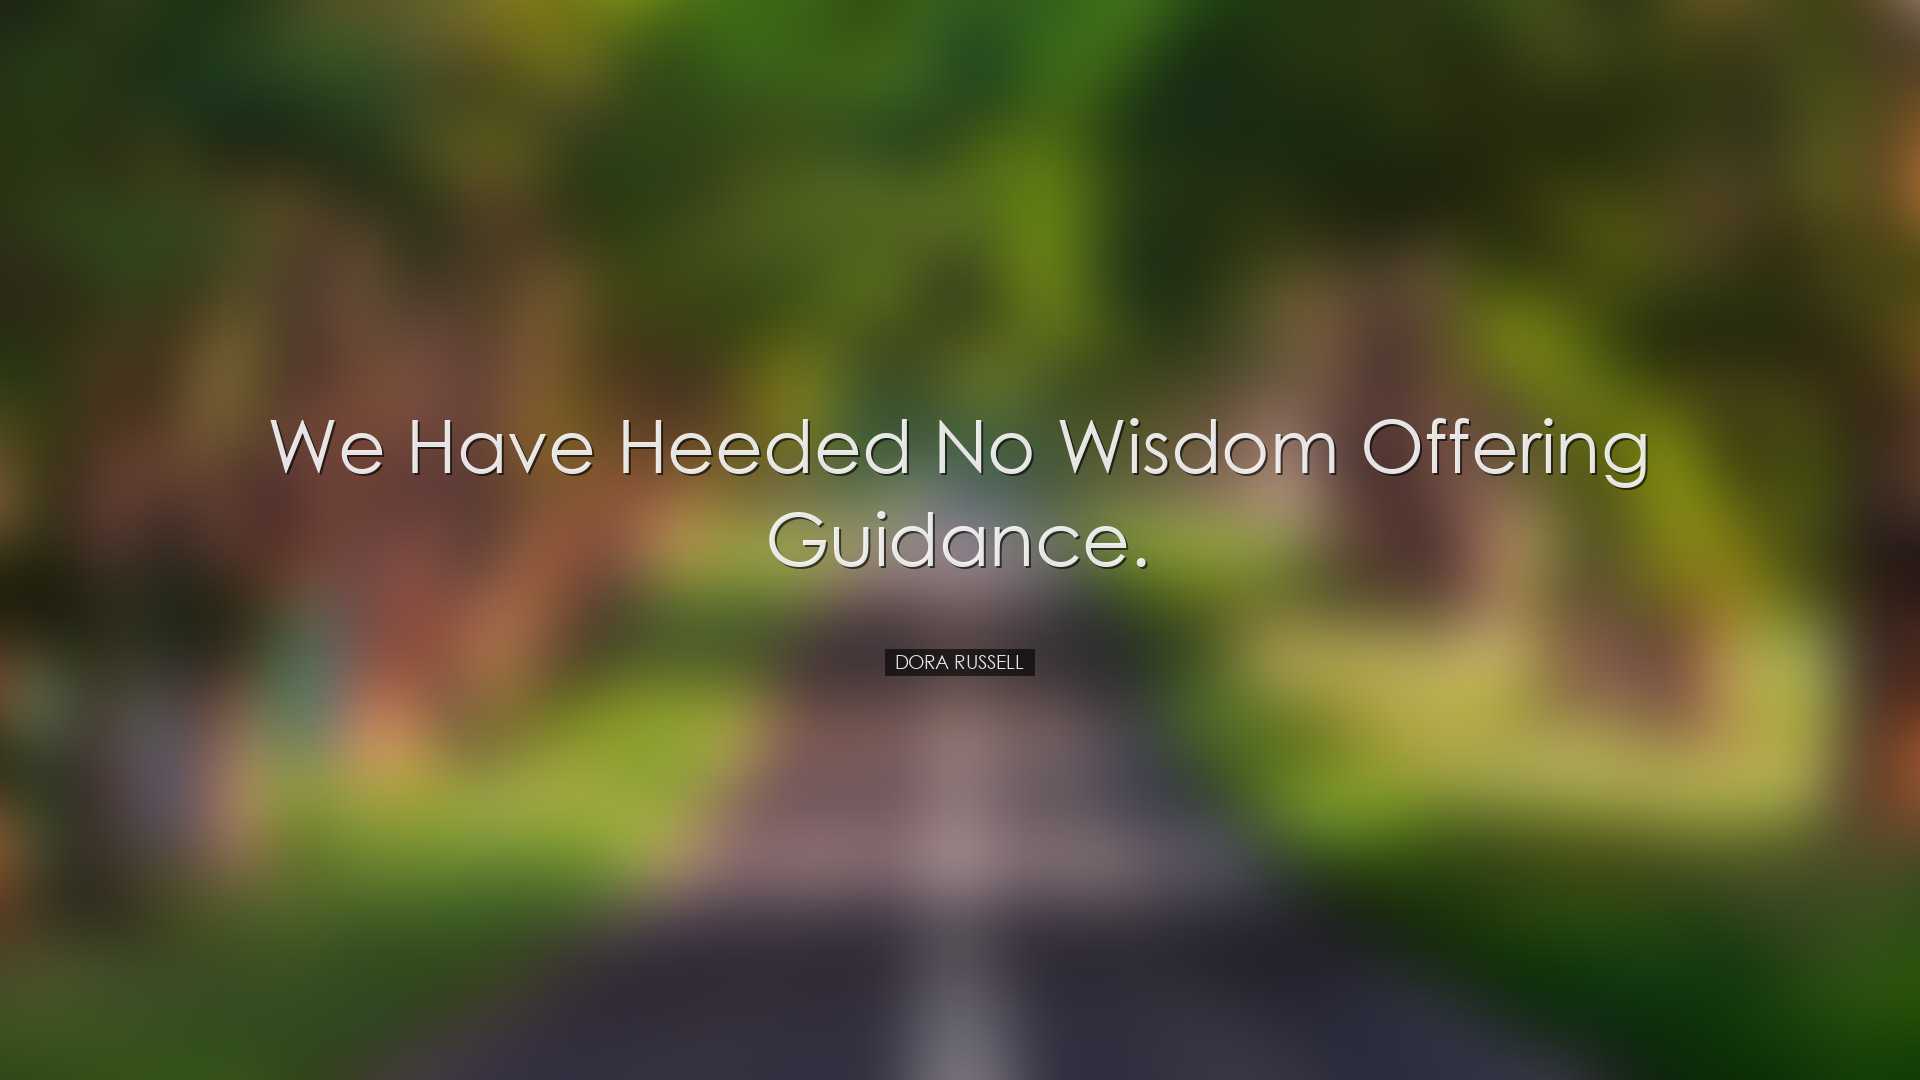 We have heeded no wisdom offering guidance. - Dora Russell